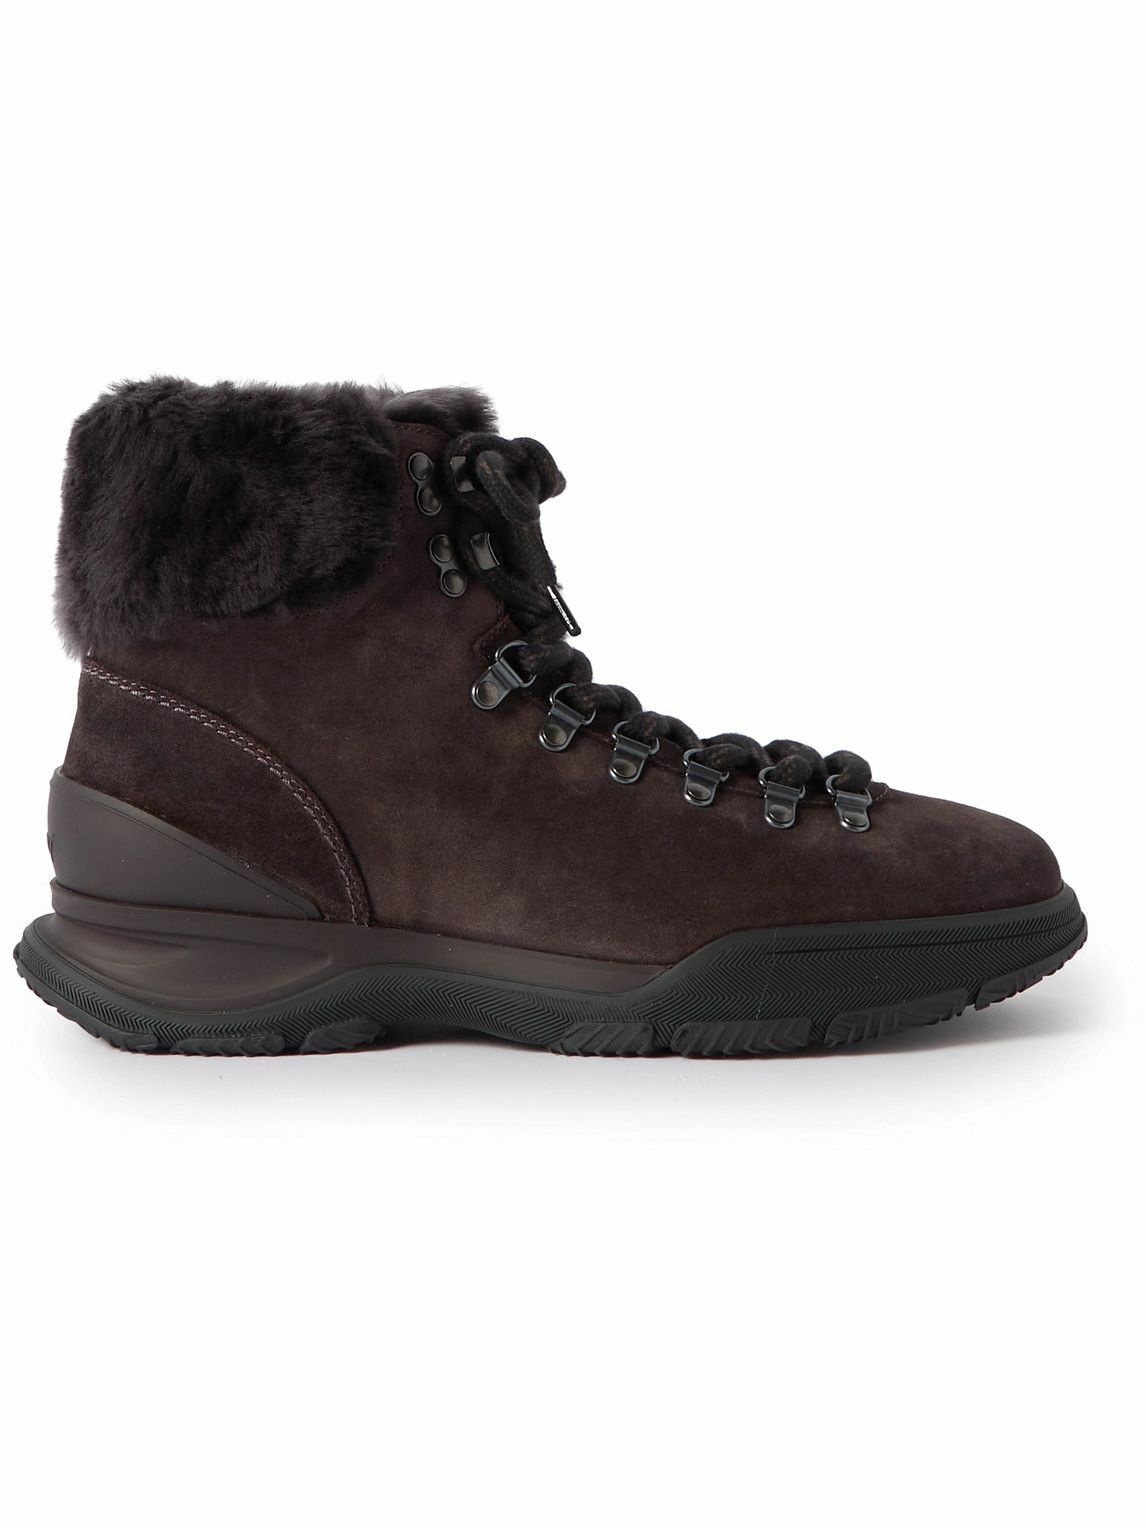 Photo: Brioni - Faux Fur-Trimmed Suede Hiking Boots - Brown